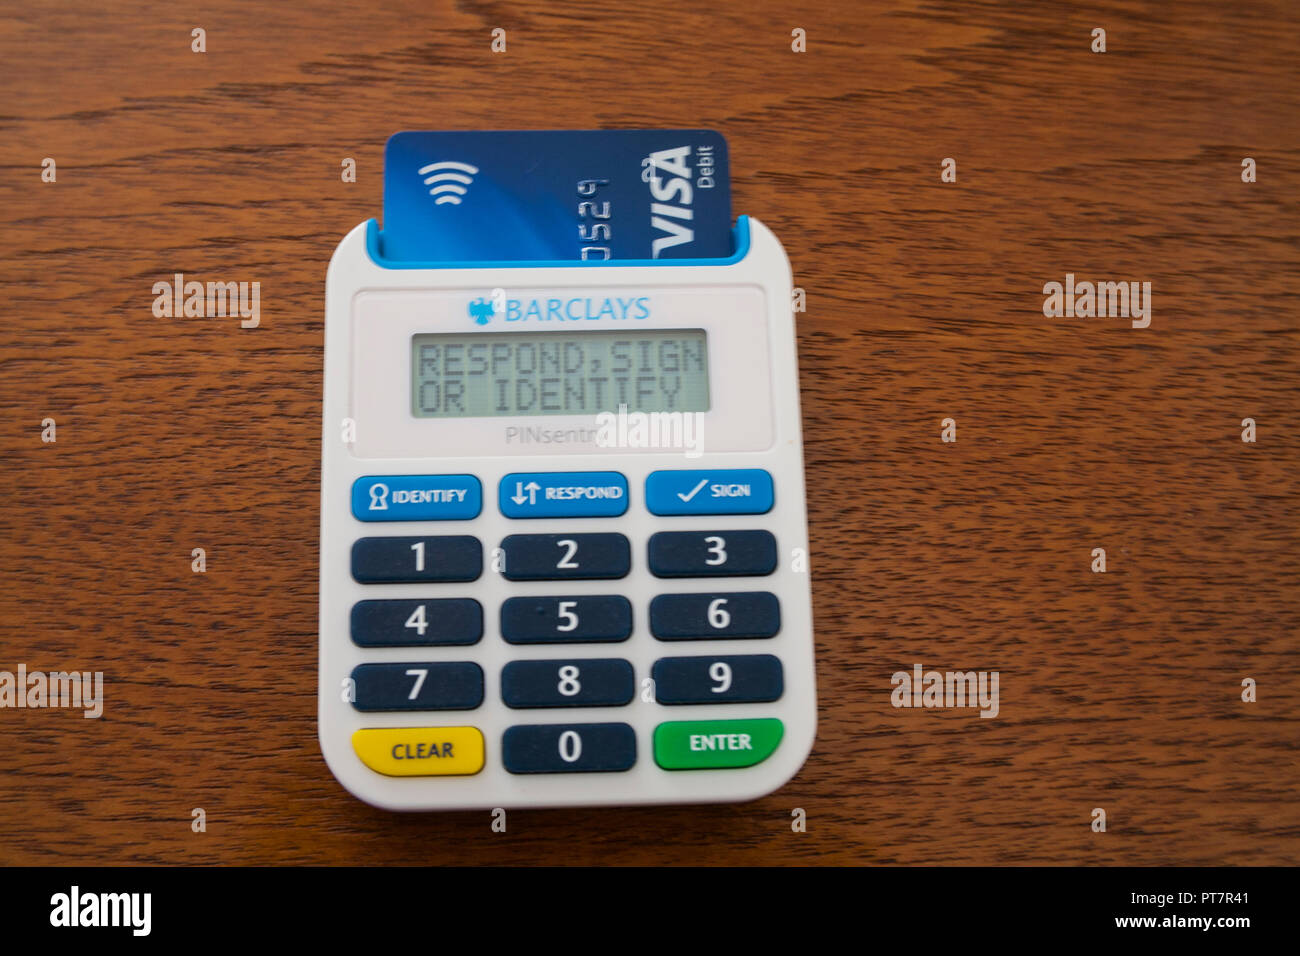 PINsentry card reader for access to Barclays Online Banking features with extra layer of security debit card inserted to access current account Stock Photo